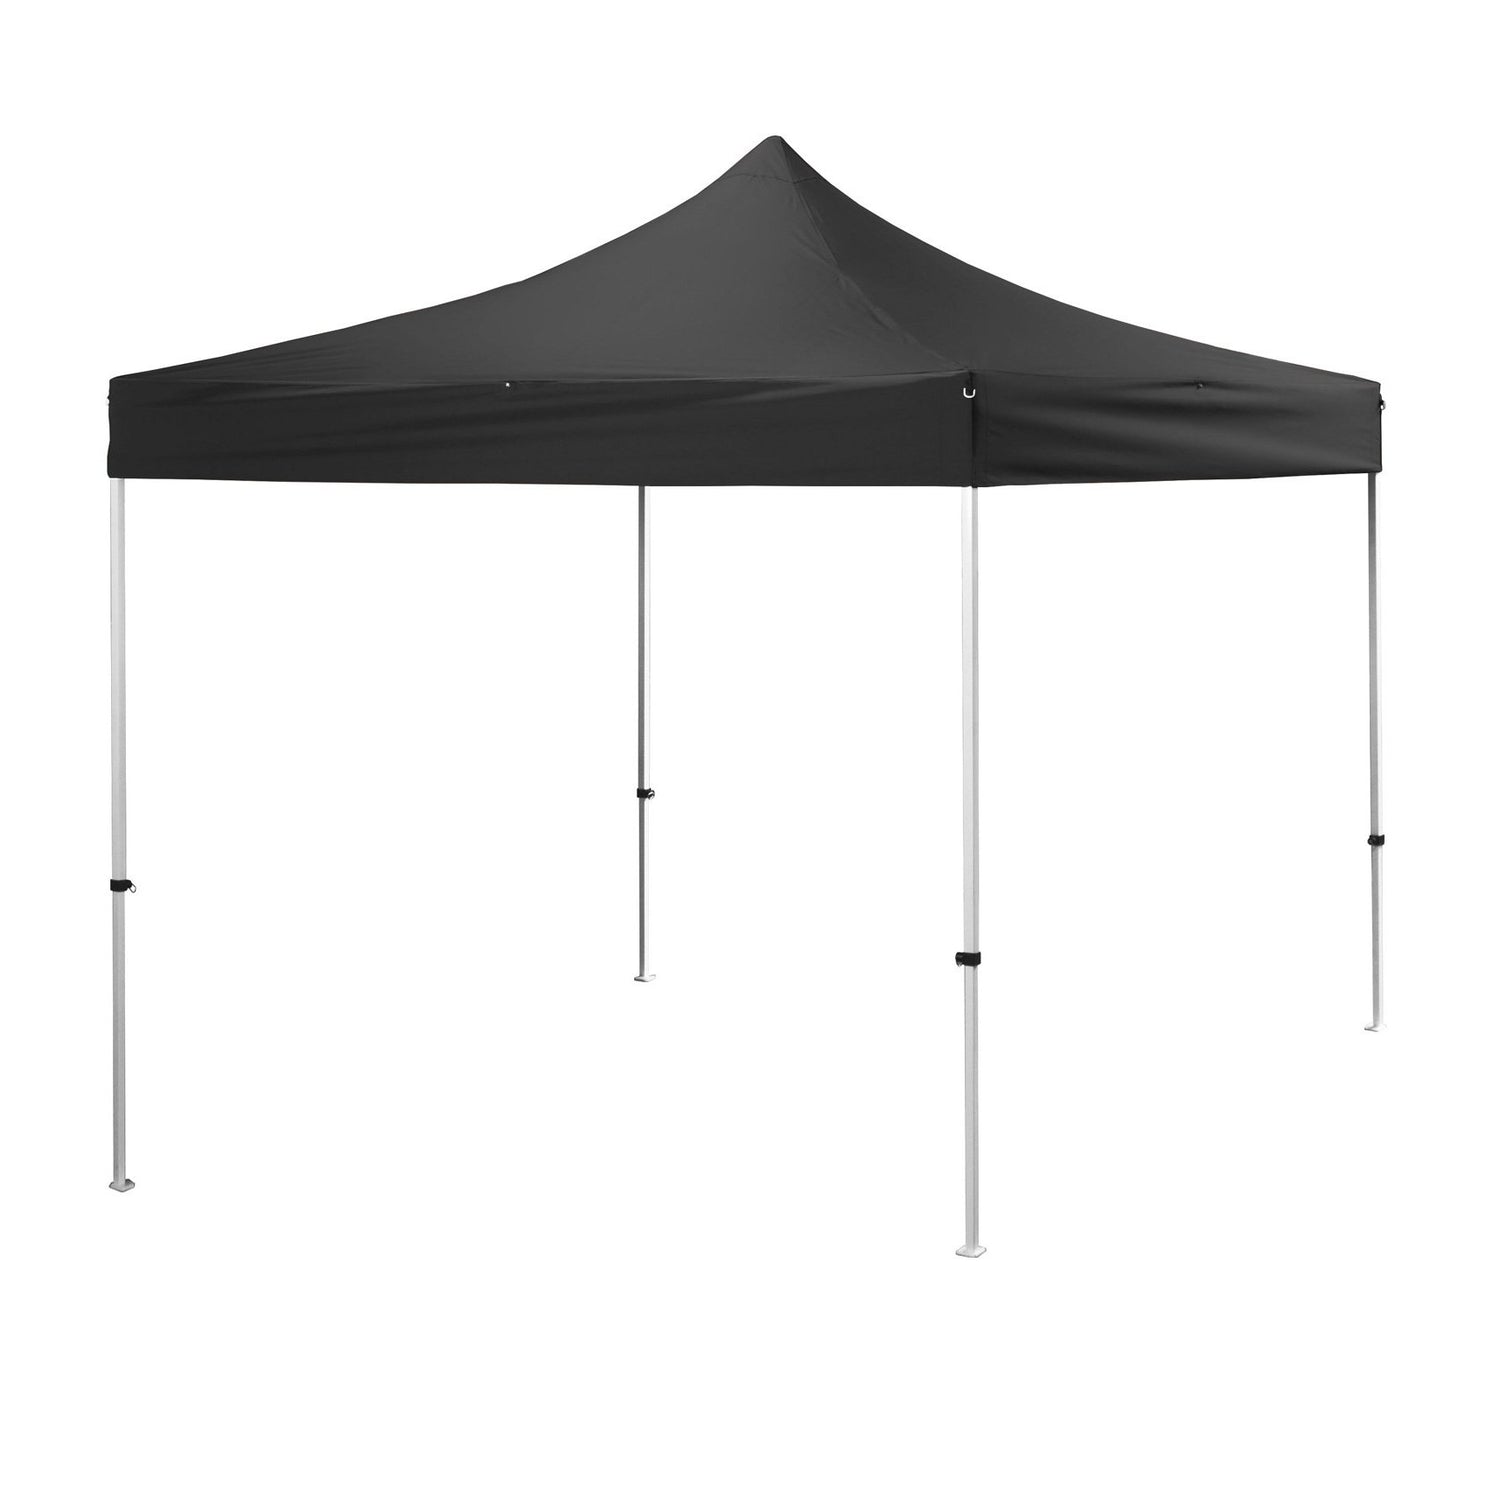 POP-UP CANOPY TENTS